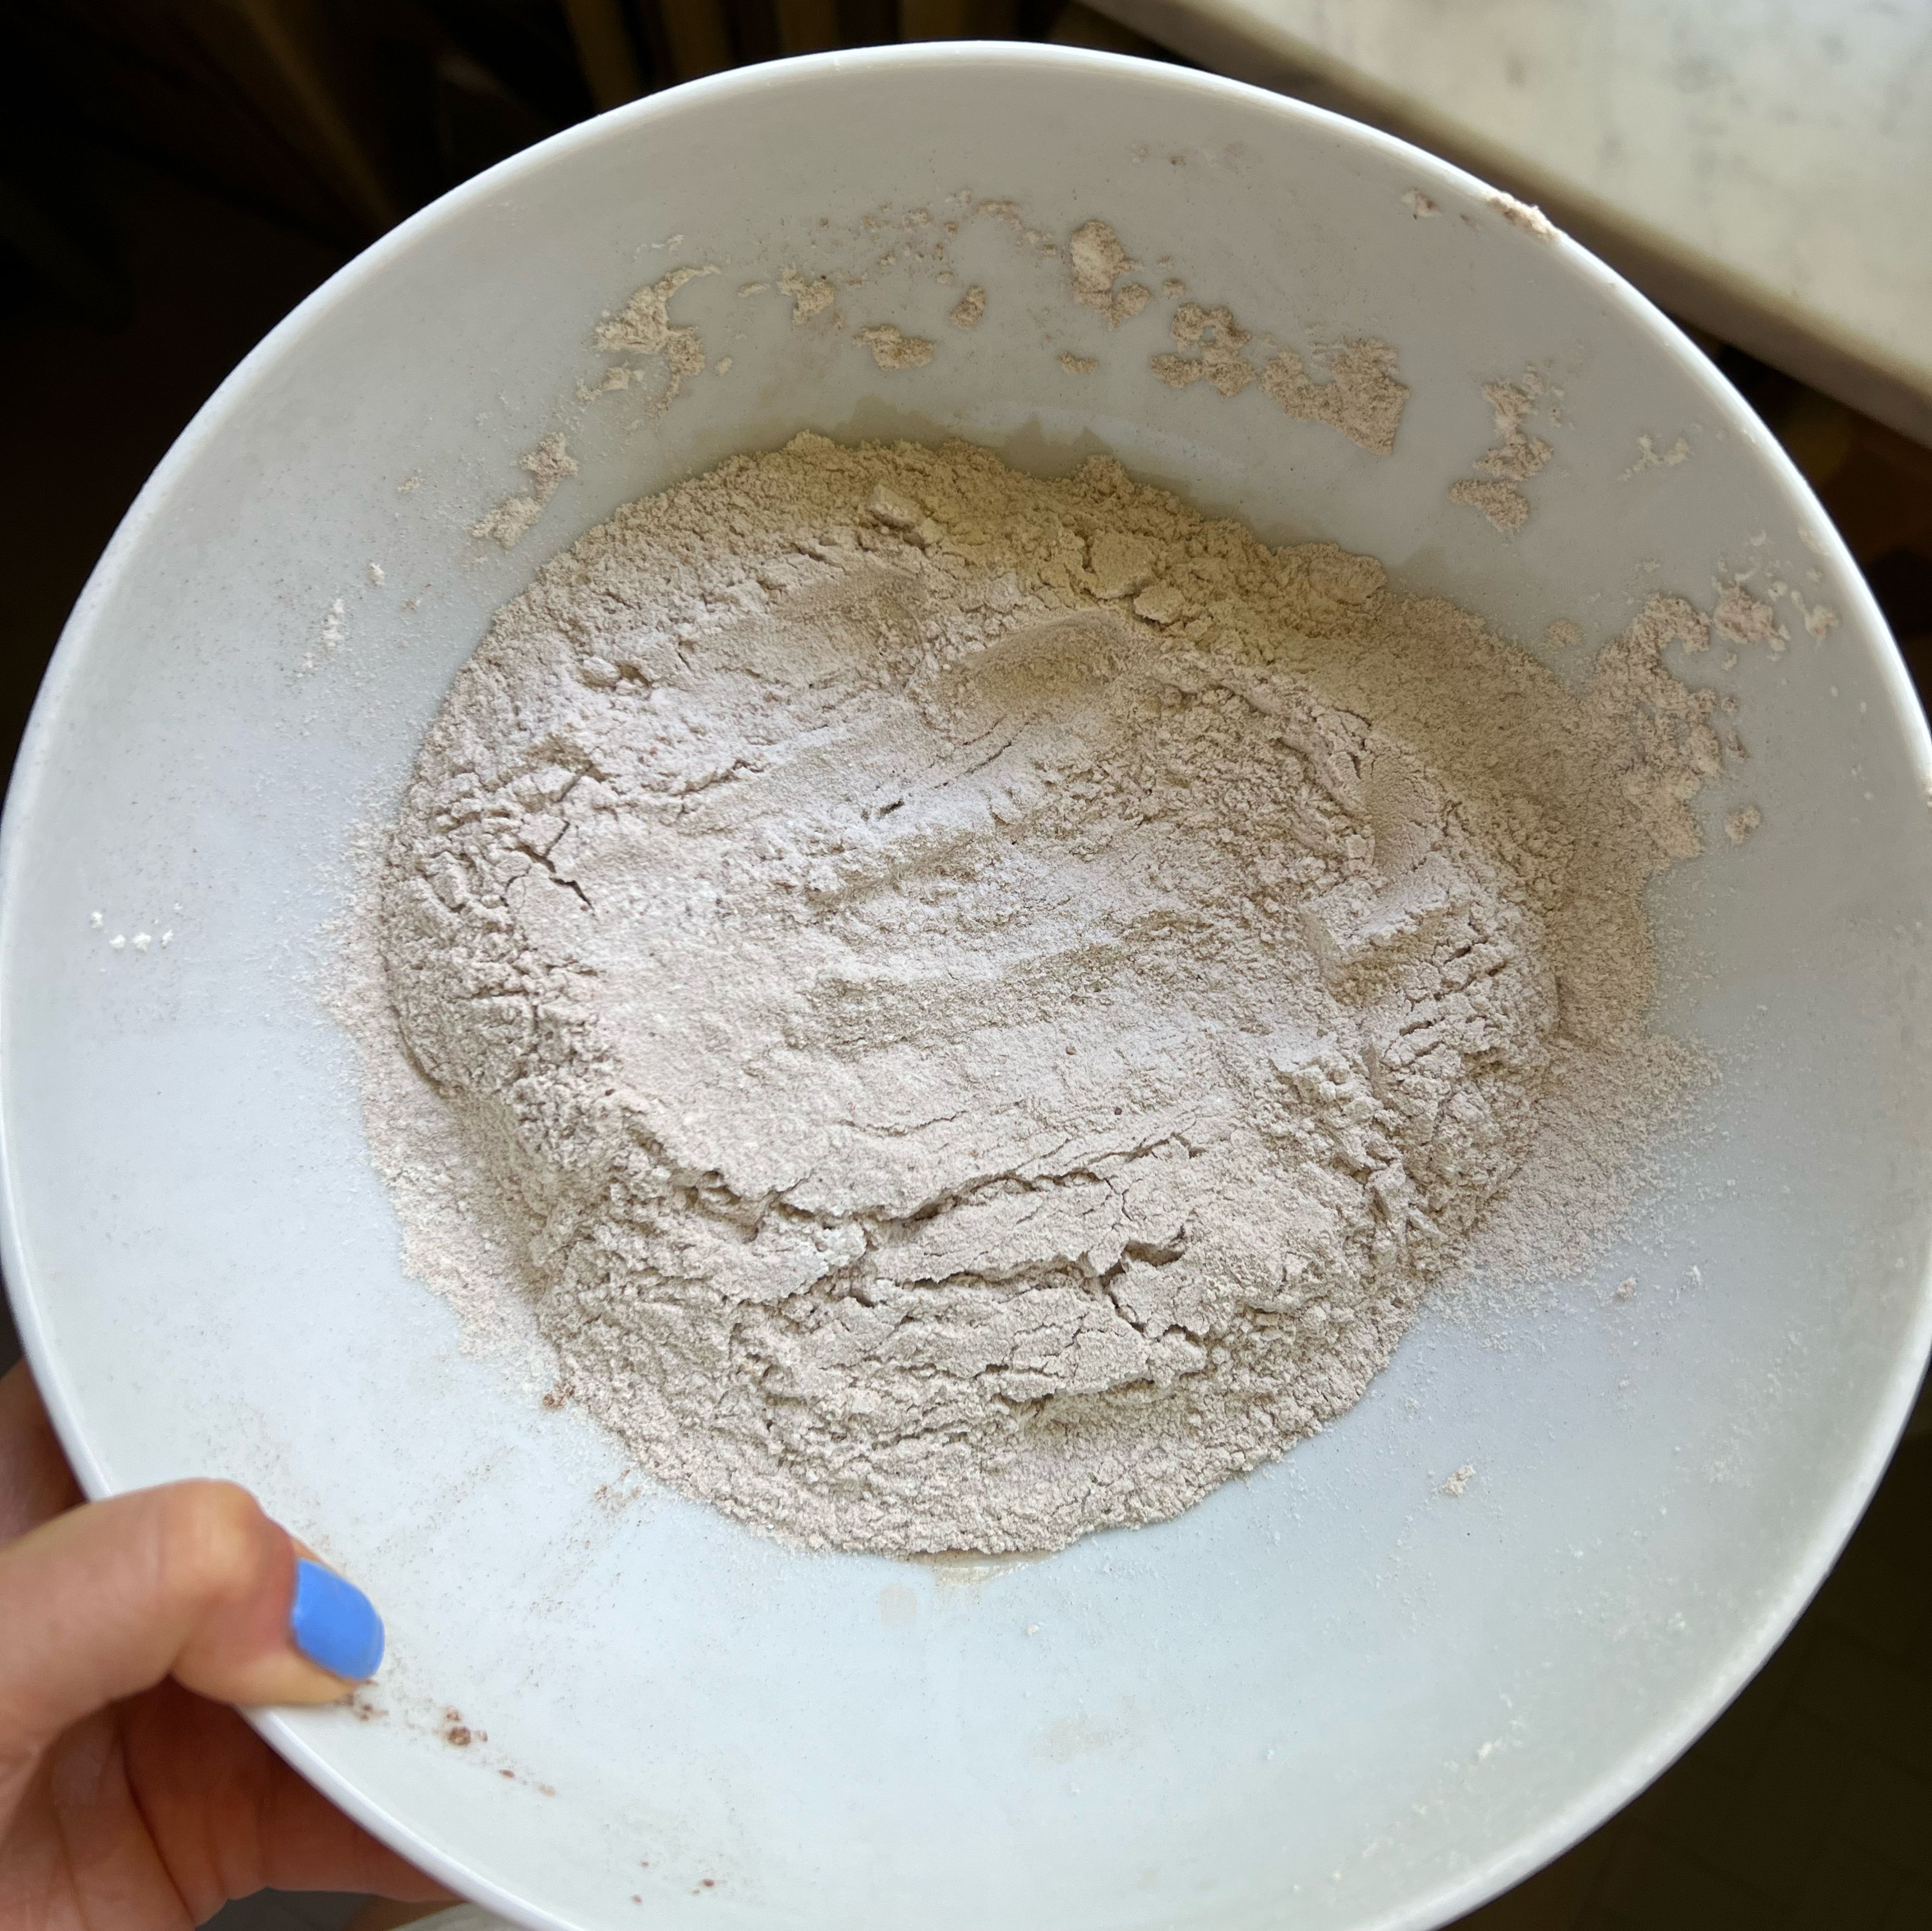 To make dry mixture you'll need to whisk and sift all-purpose flour, baking powder, salt and all the spices (cinnamon, cardamon, nutmeg) until they are well blended. 
